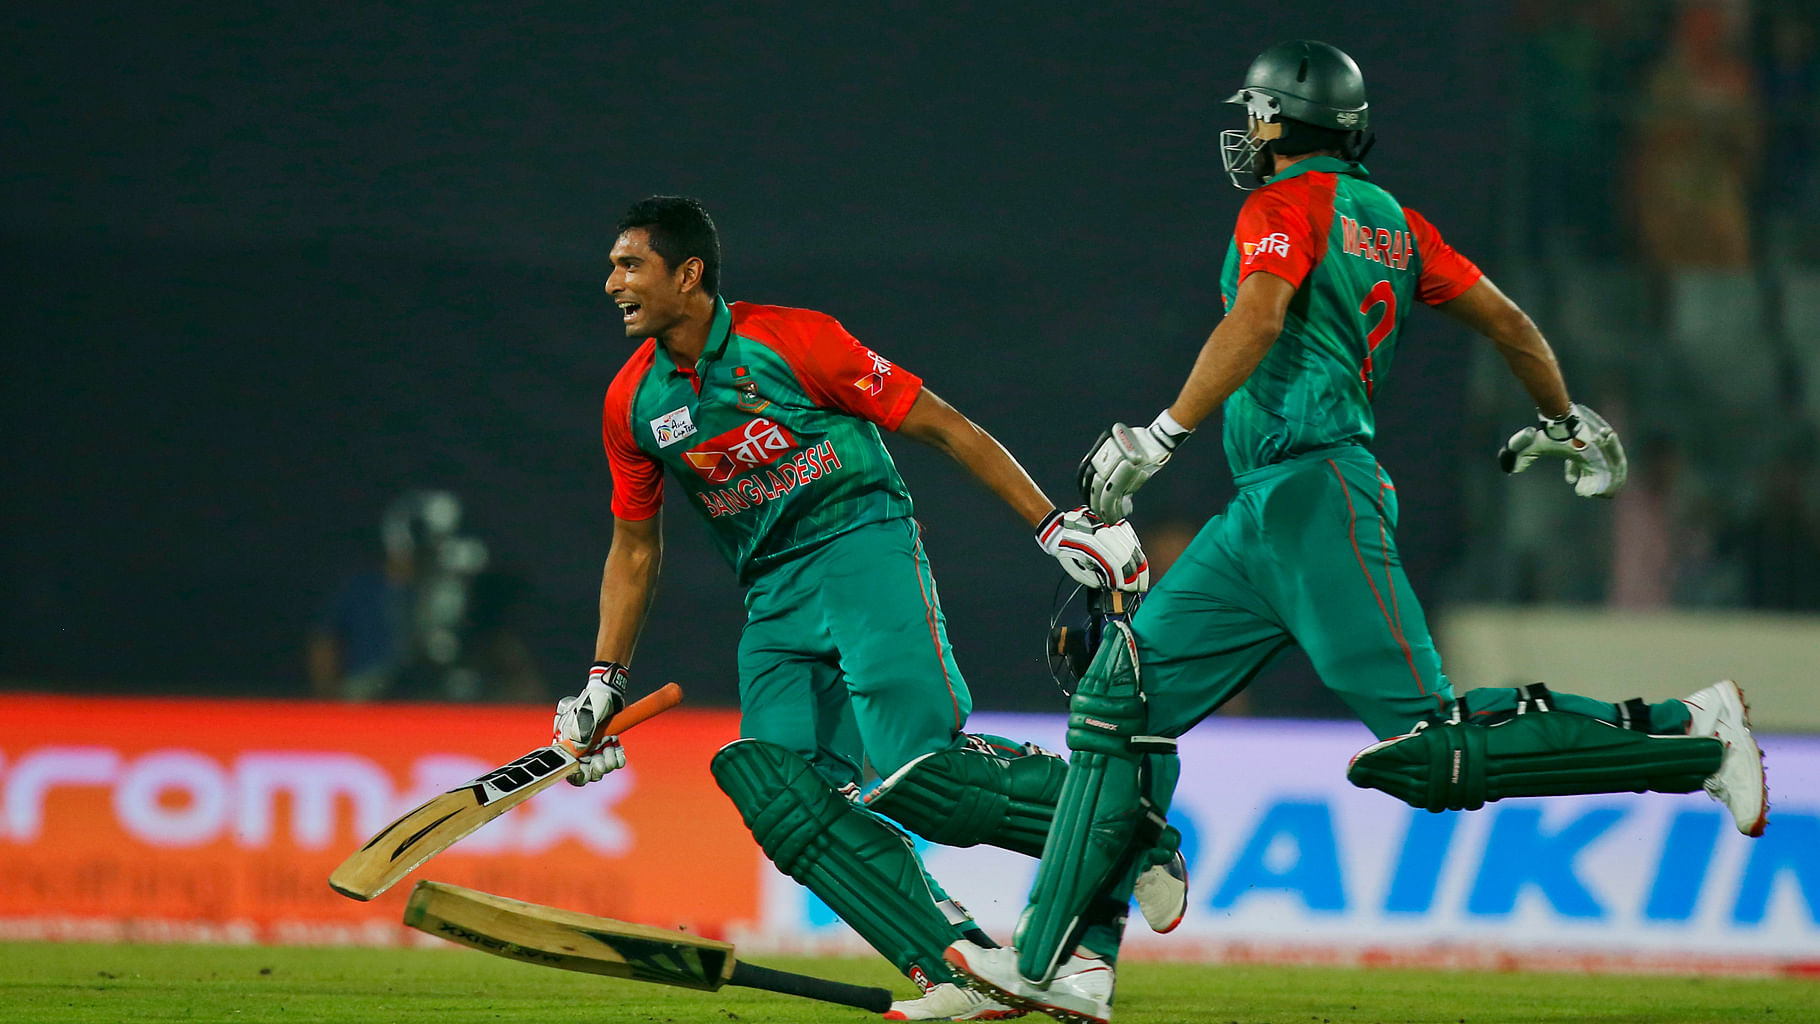 Bangladesh World Cup Squad 2019 Full List of Players in Bangladesh’s